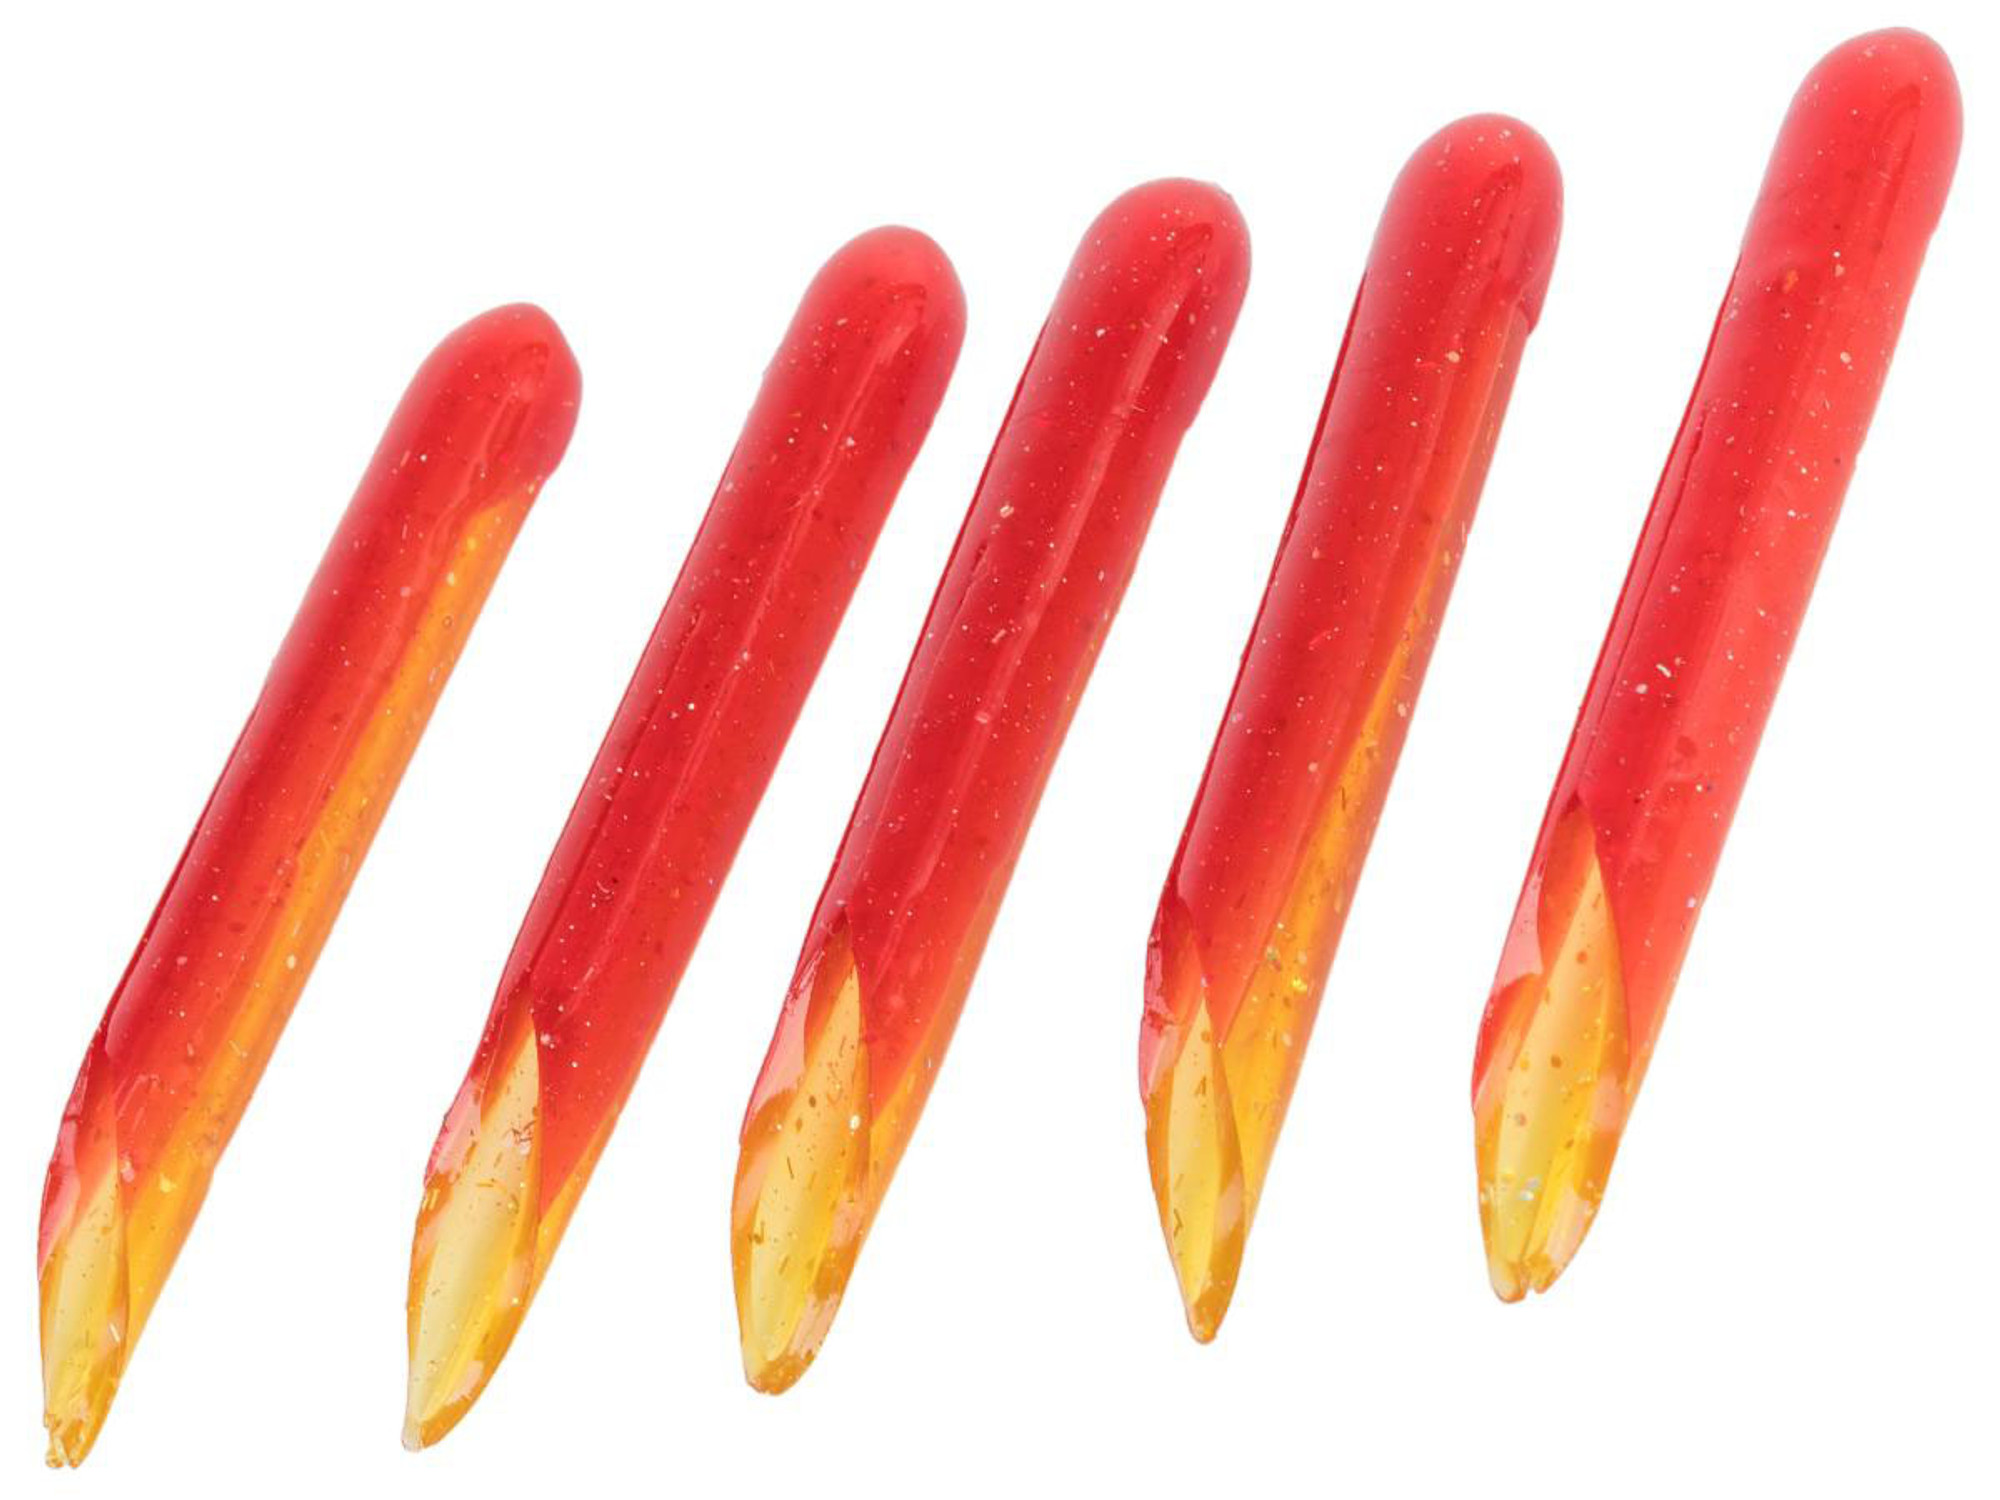 Hook Up Baits Hand Crafted Replacement Bodies for Jigs (Color: Red Crab / Large)